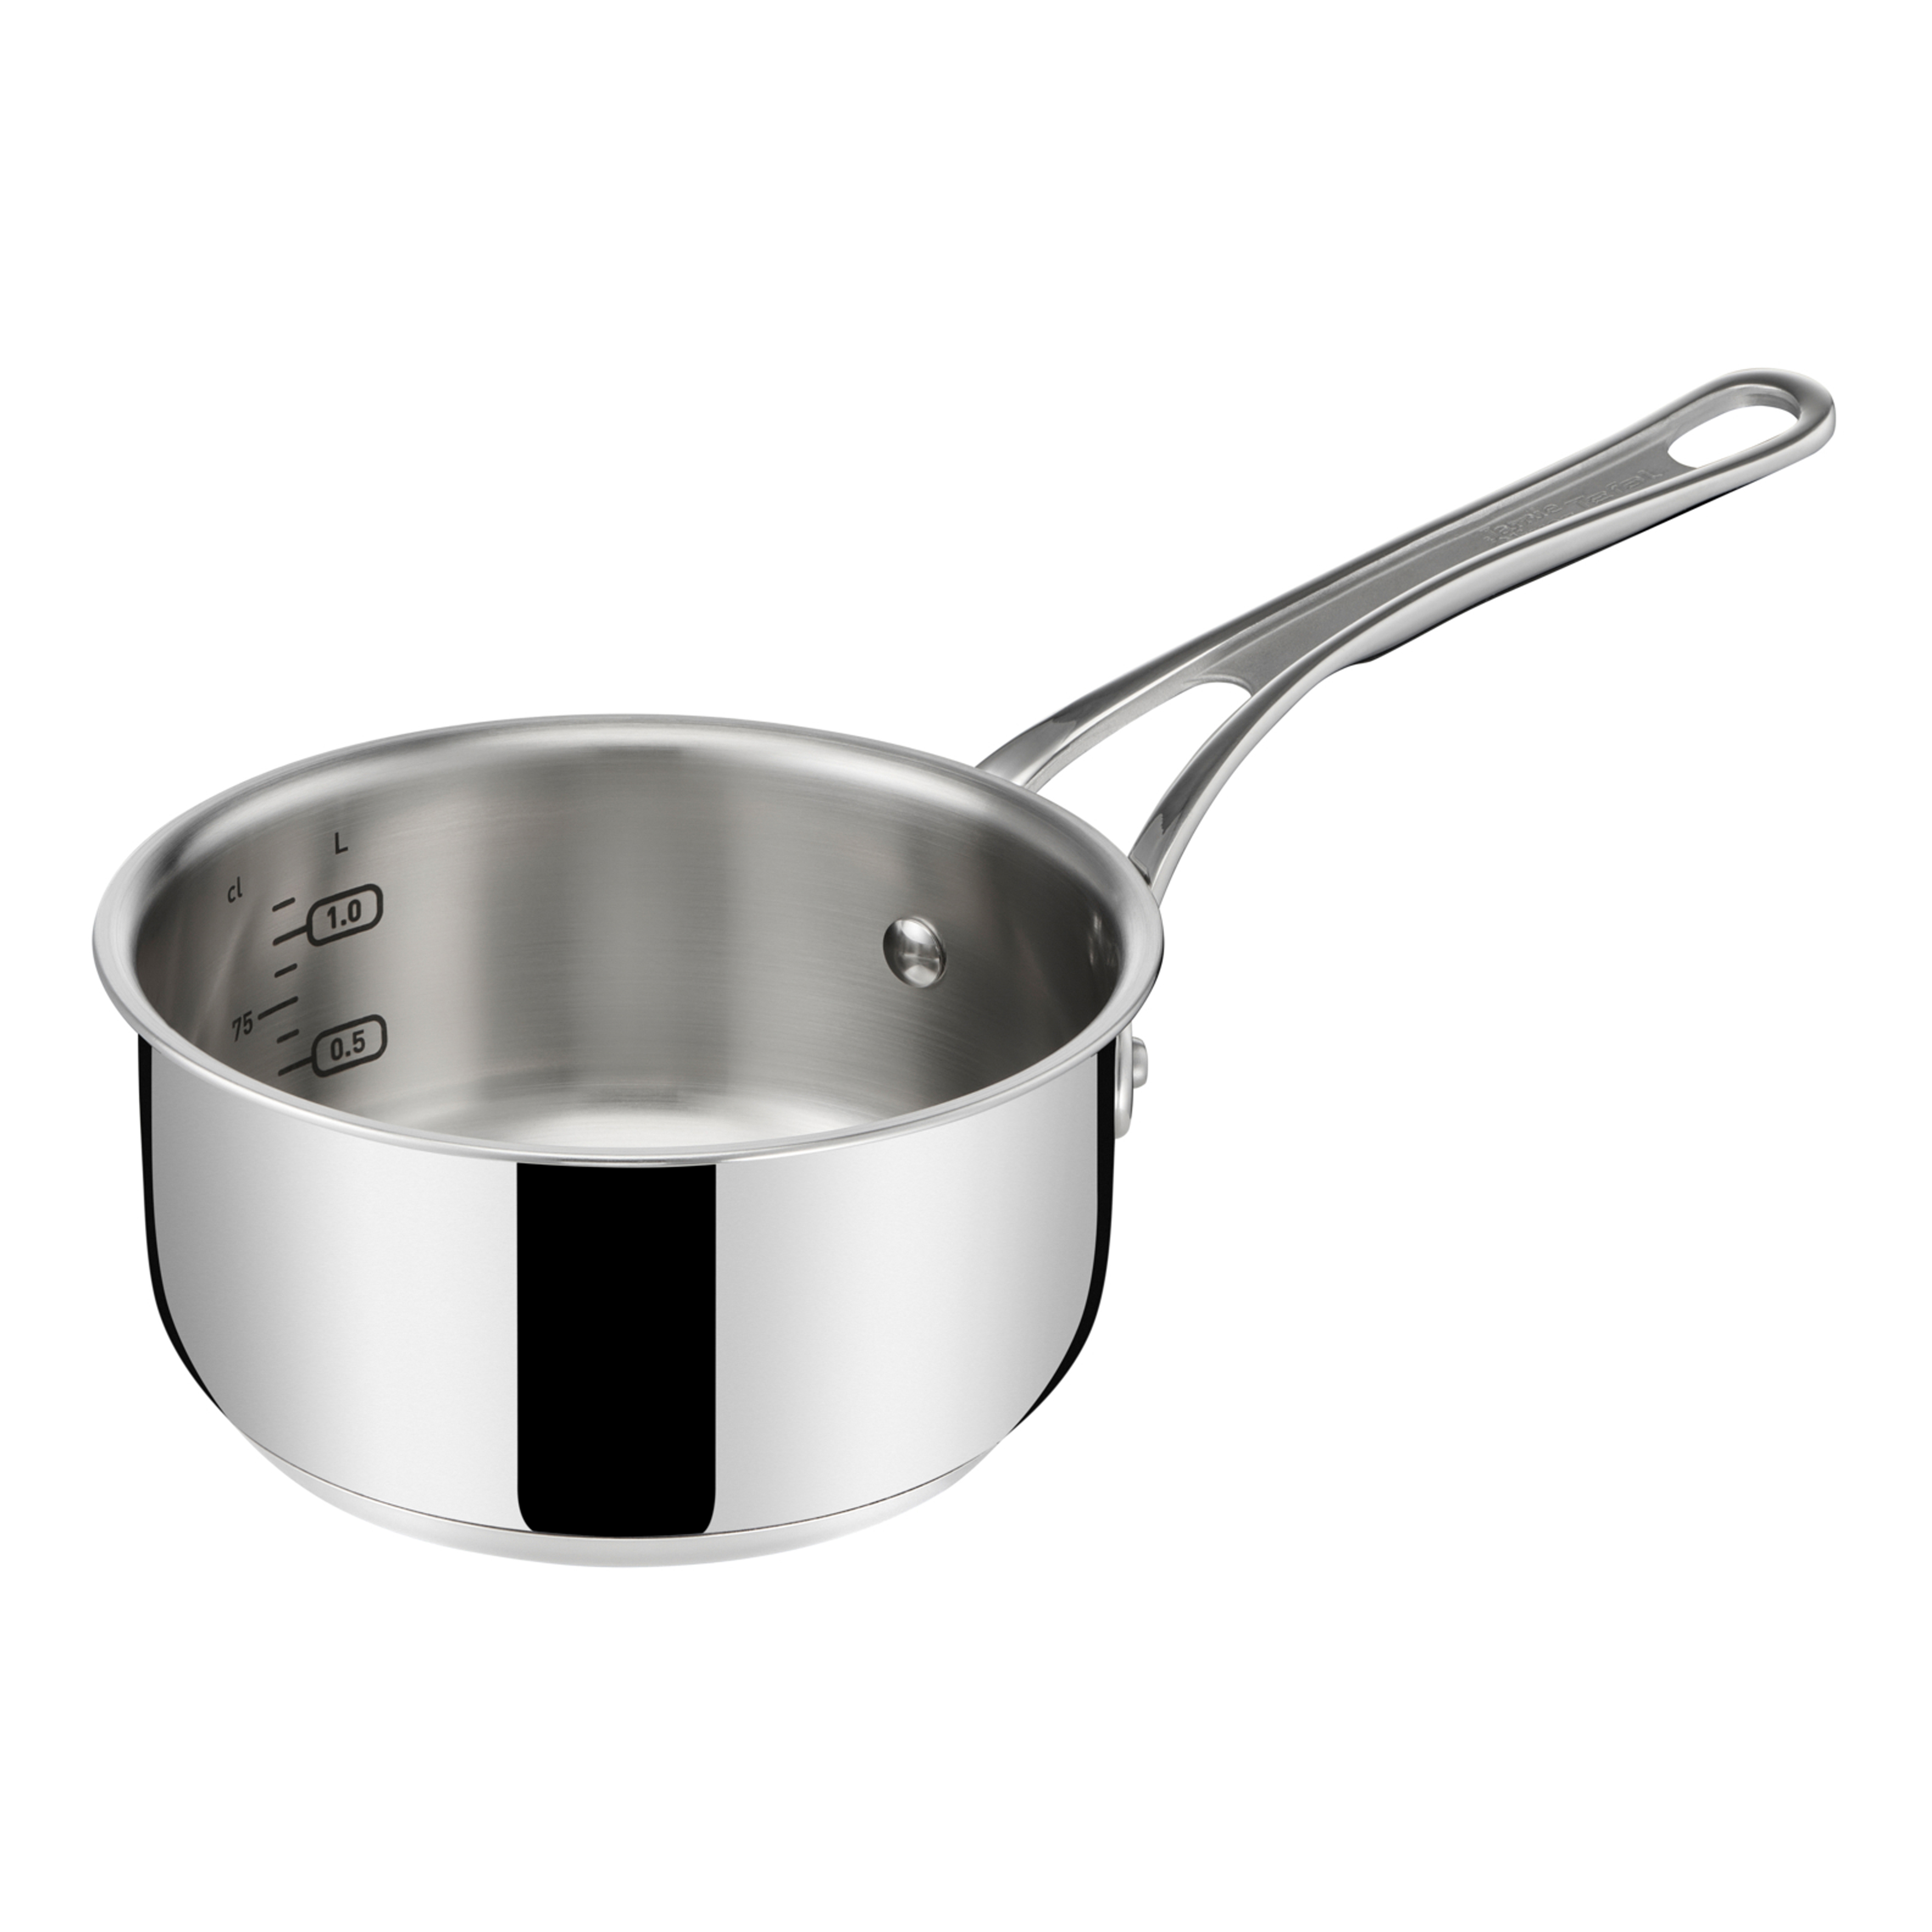 https://www.nordicnest.com/assets/blobs/tefal-jamie-oliver-cooks-classics-sauce-pan-set-7-pieces-stainless-steel/506744-01_4_ProductImageExtra-59e57bf5eb.jpg